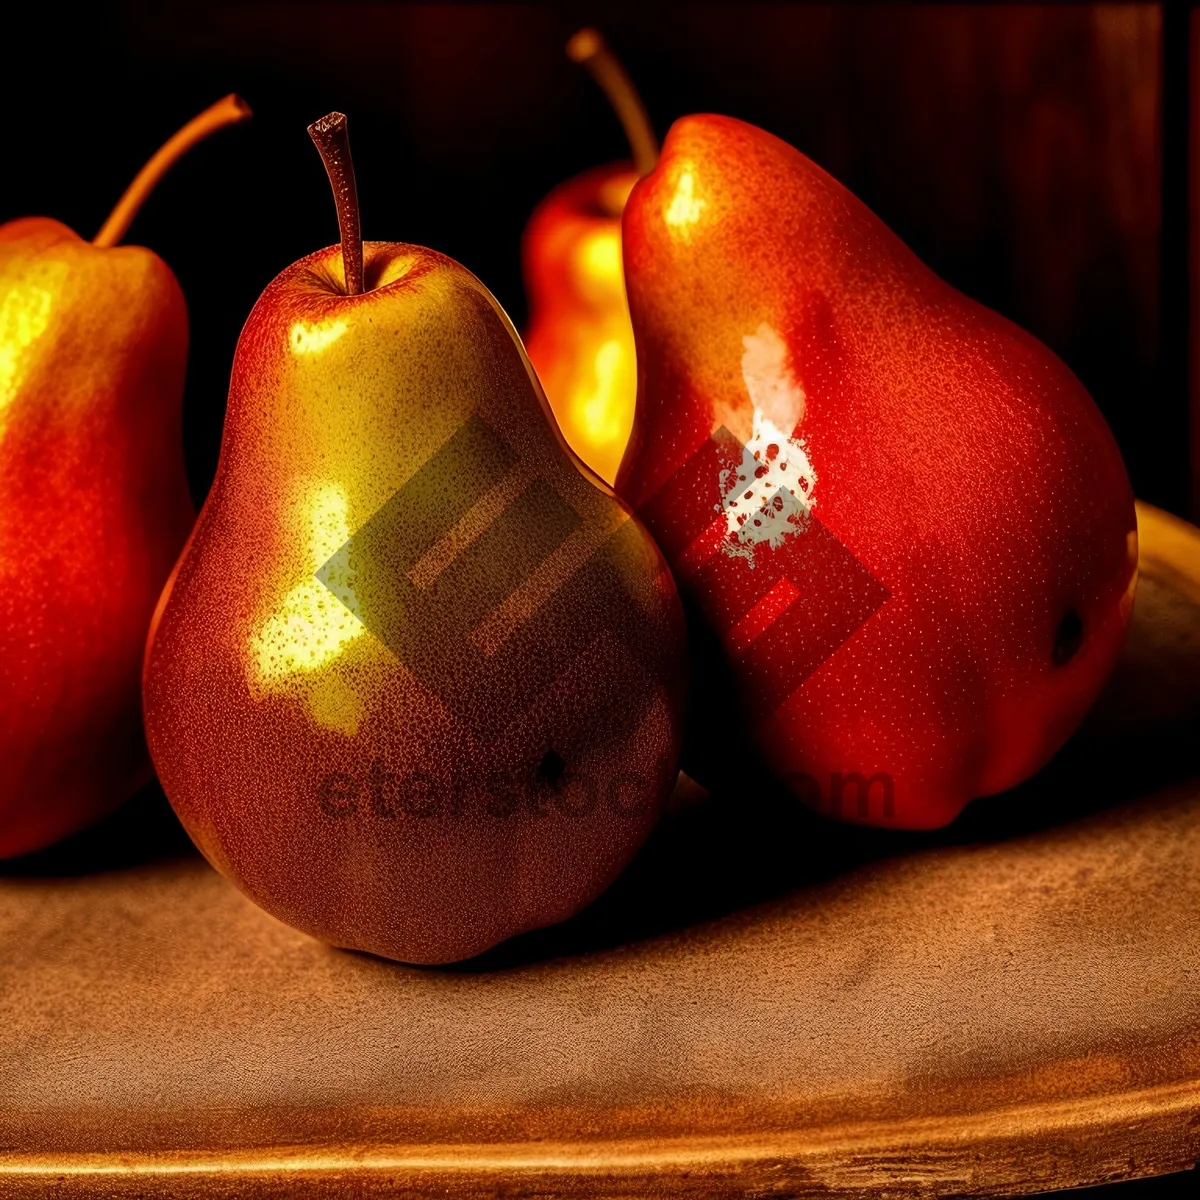 Picture of Juicy, Ripe Pear - Fresh, Delicious, and Healthy